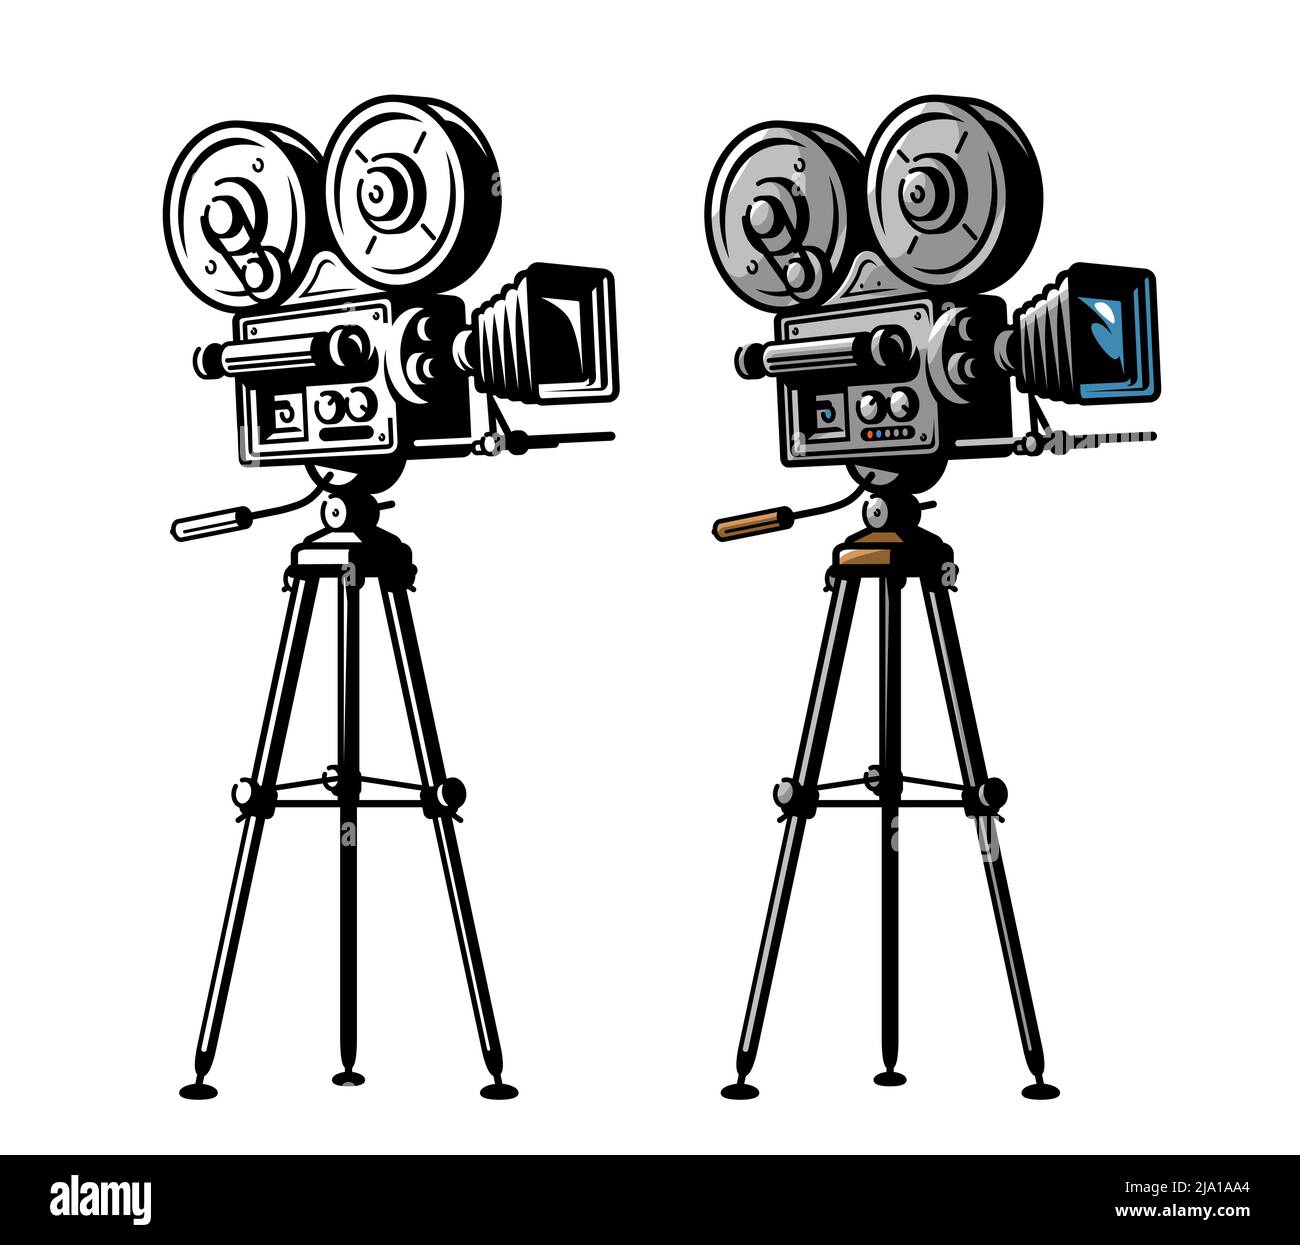 Vintage video projector. Retro movie camera on tripod isolated on white background. Vector illustration Stock Vector